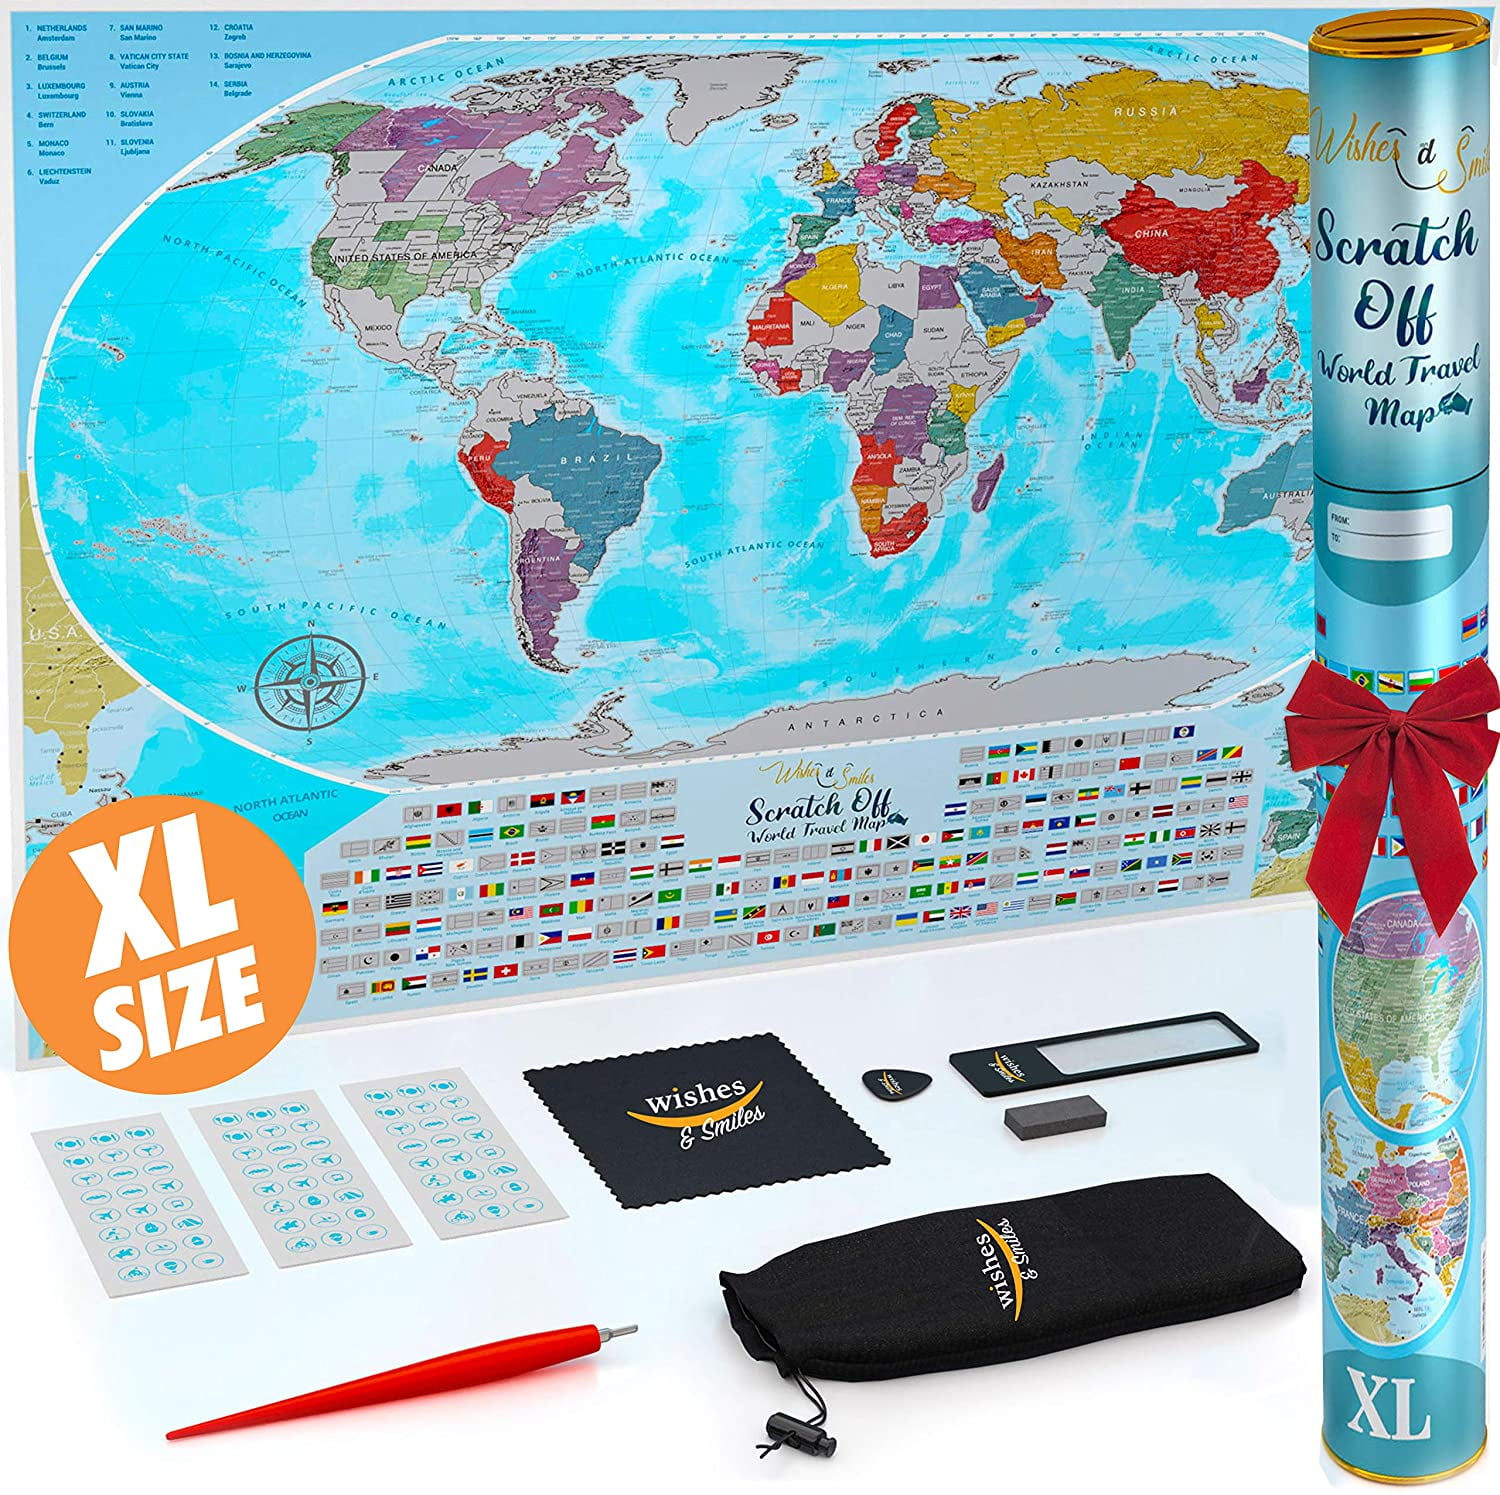 Color Change Technology Travel Gift Includes Complete Wall Art Accessories for Travelers ÌFẸ́ CITY X-Large Scratch Off Map of The World Poster 